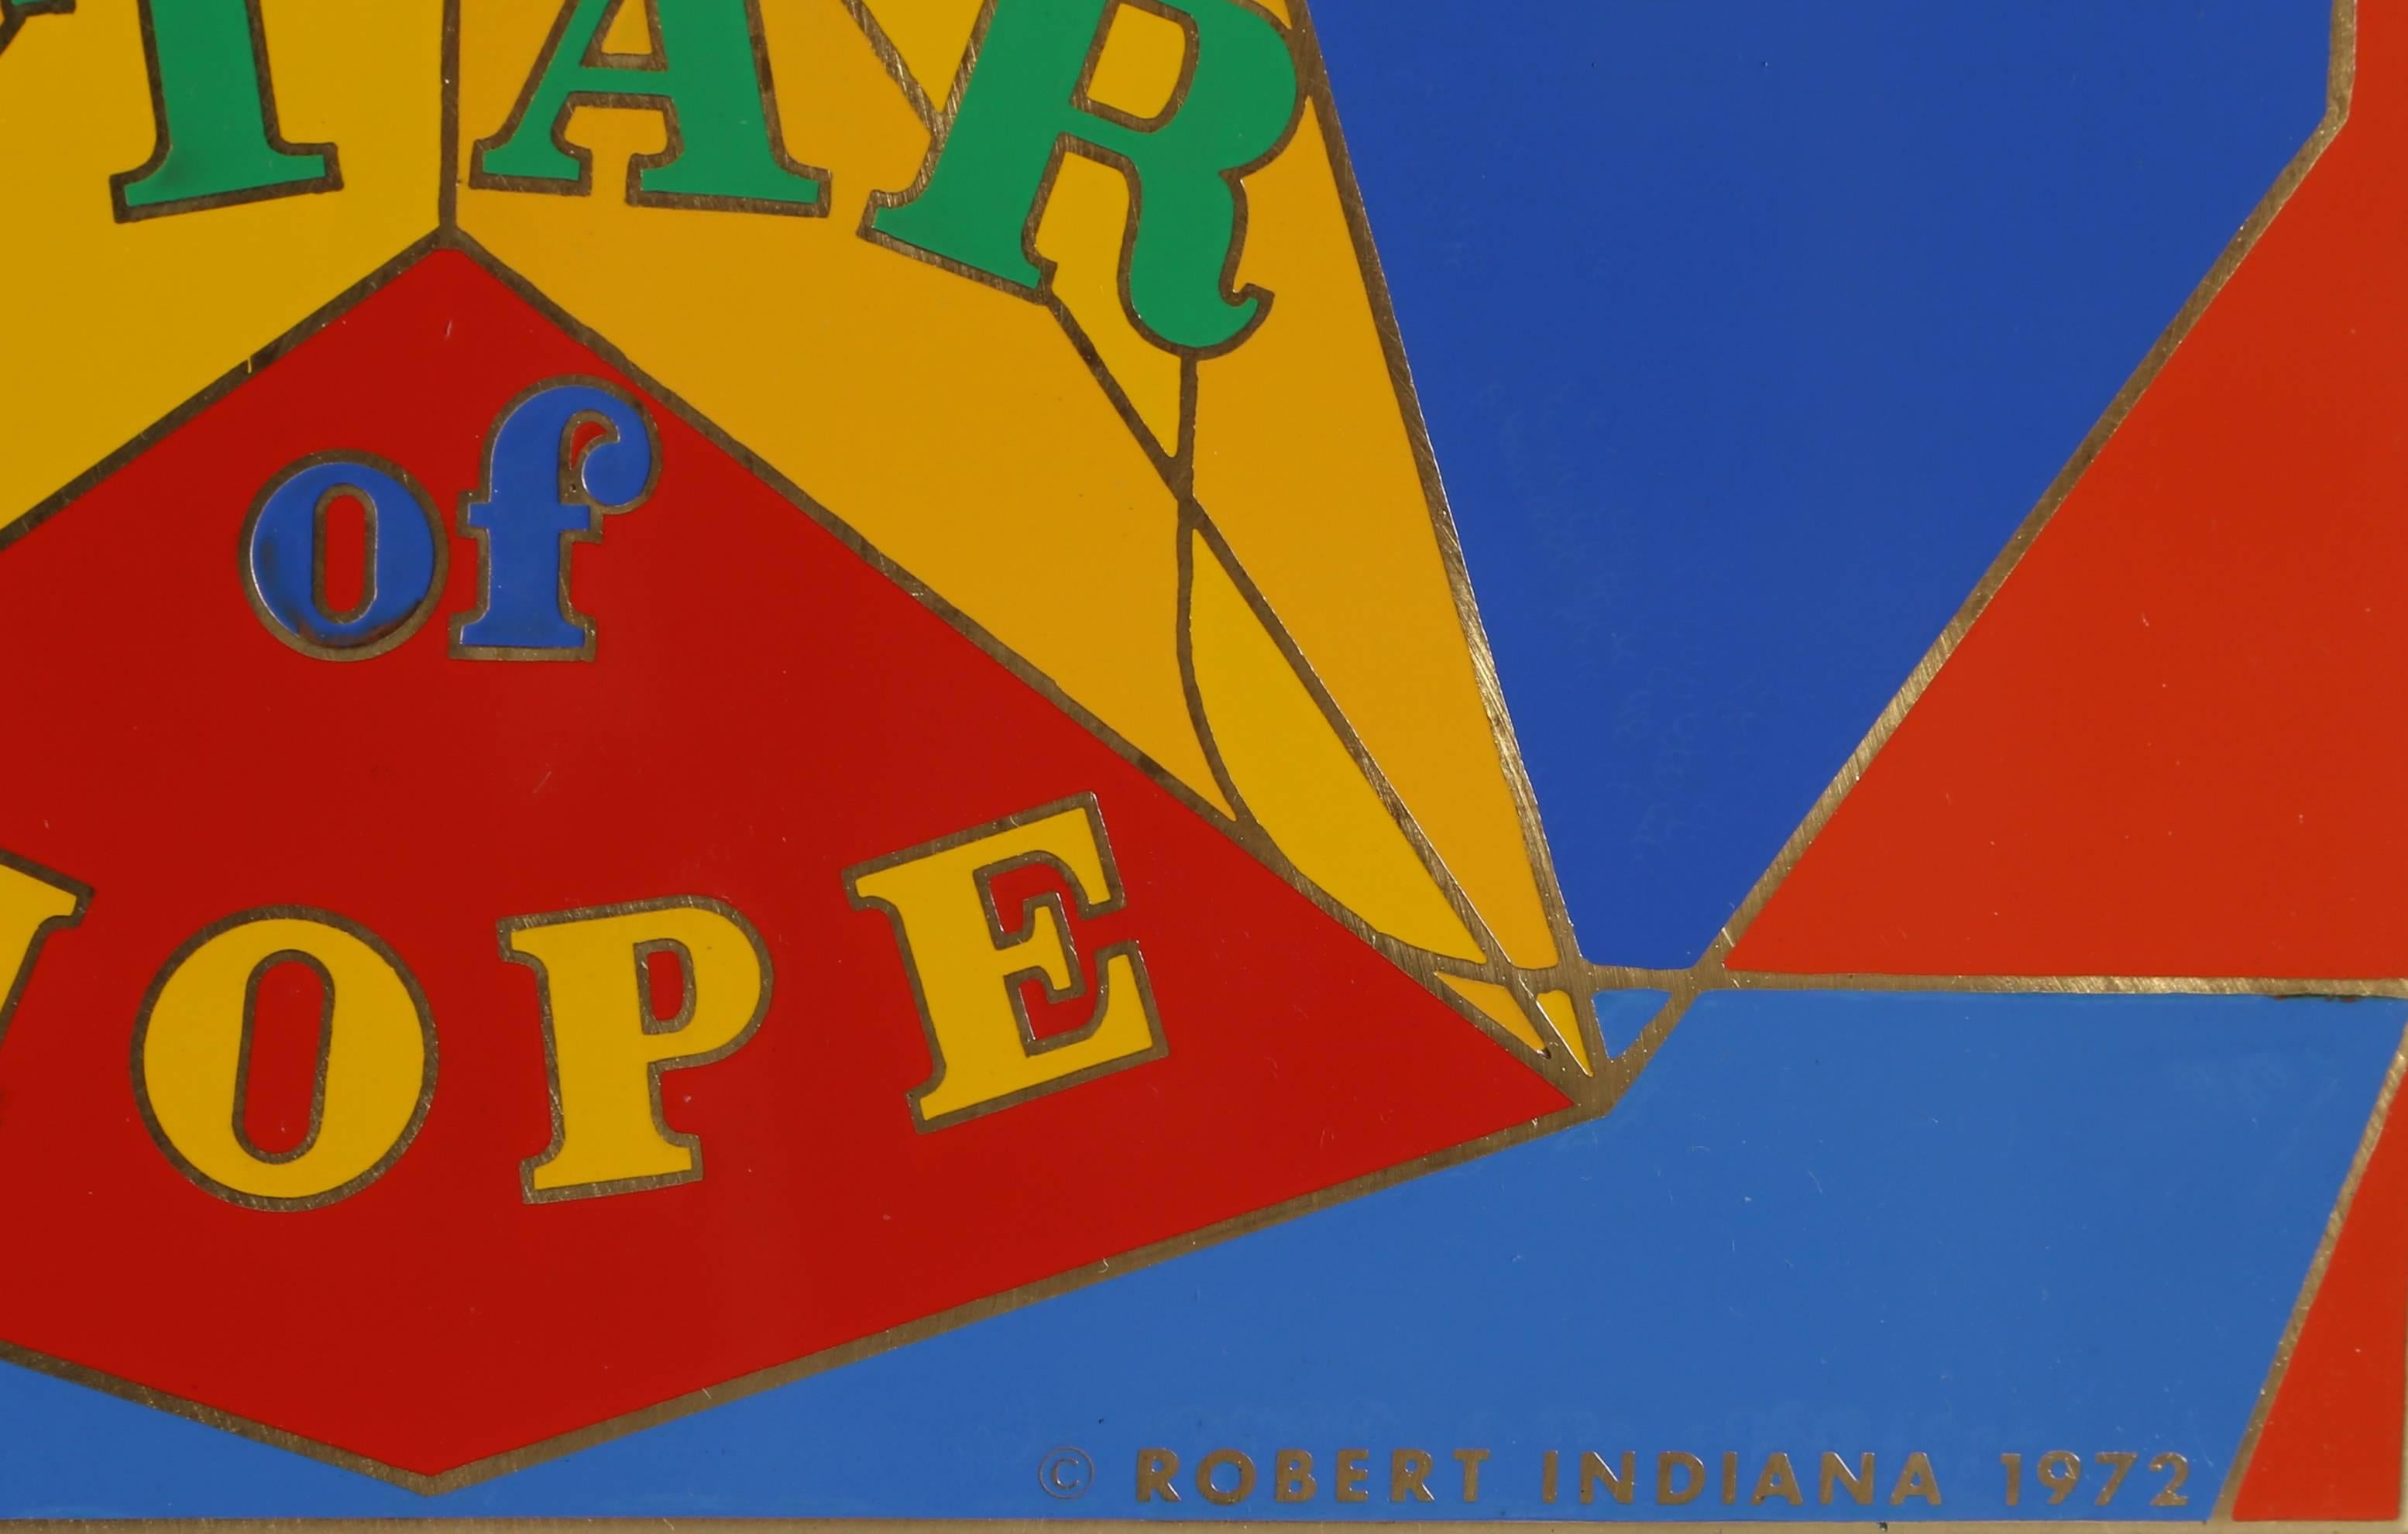 Robert Indiana’s (American, 1928-2018), Star of Hope is a reoccurring image, in fact, he named his charitable foundation the Star of Hope Foundation in 2016. A bright geometric star is set against an abstracted one composted of reds and